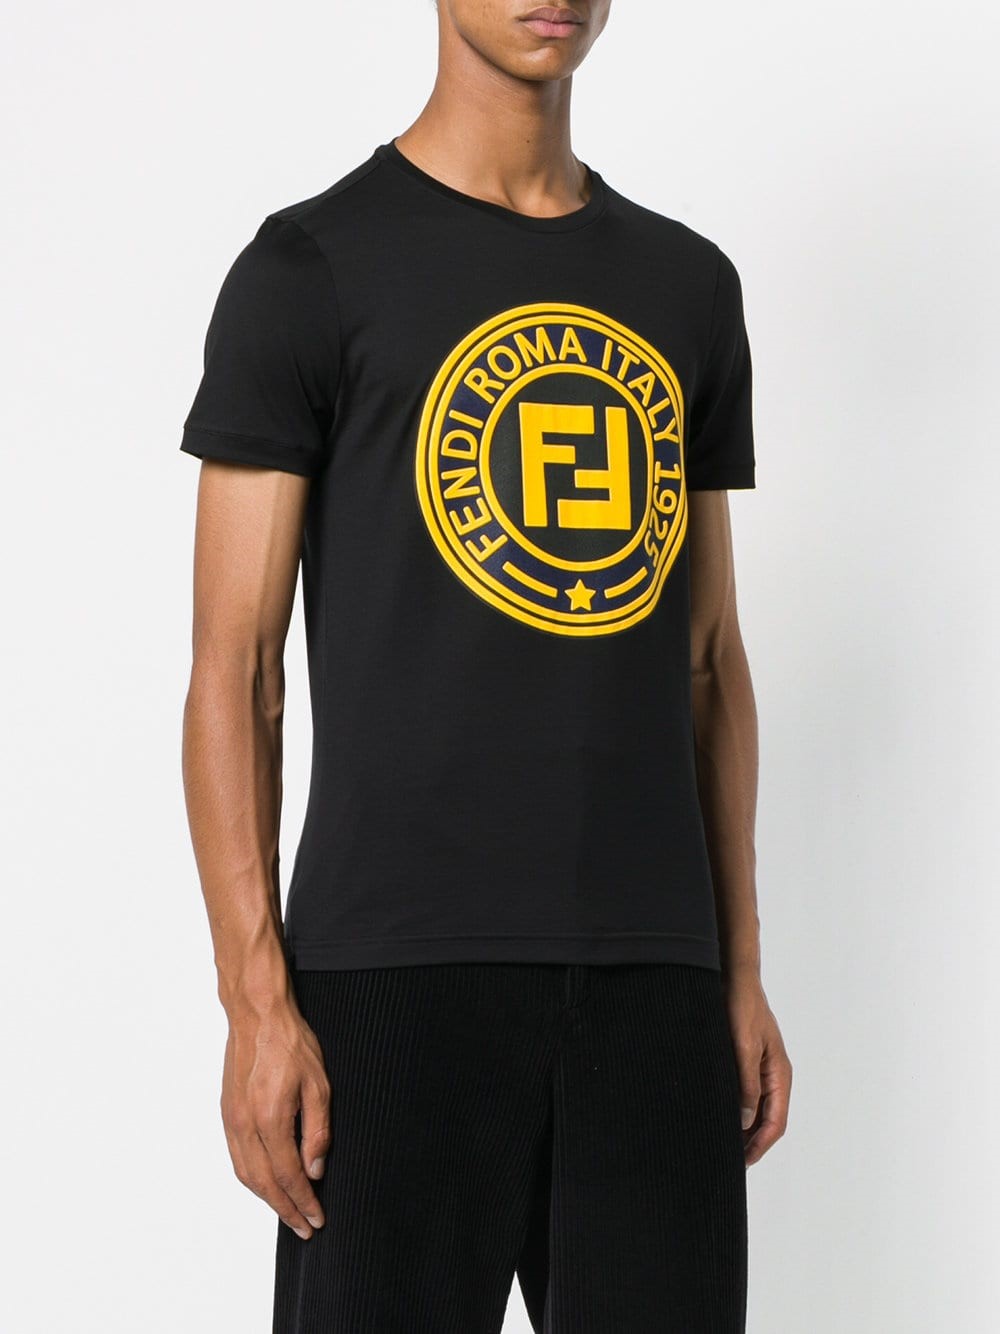 Fendi Logo T Shirt Online Store, UP TO 55% OFF | www 